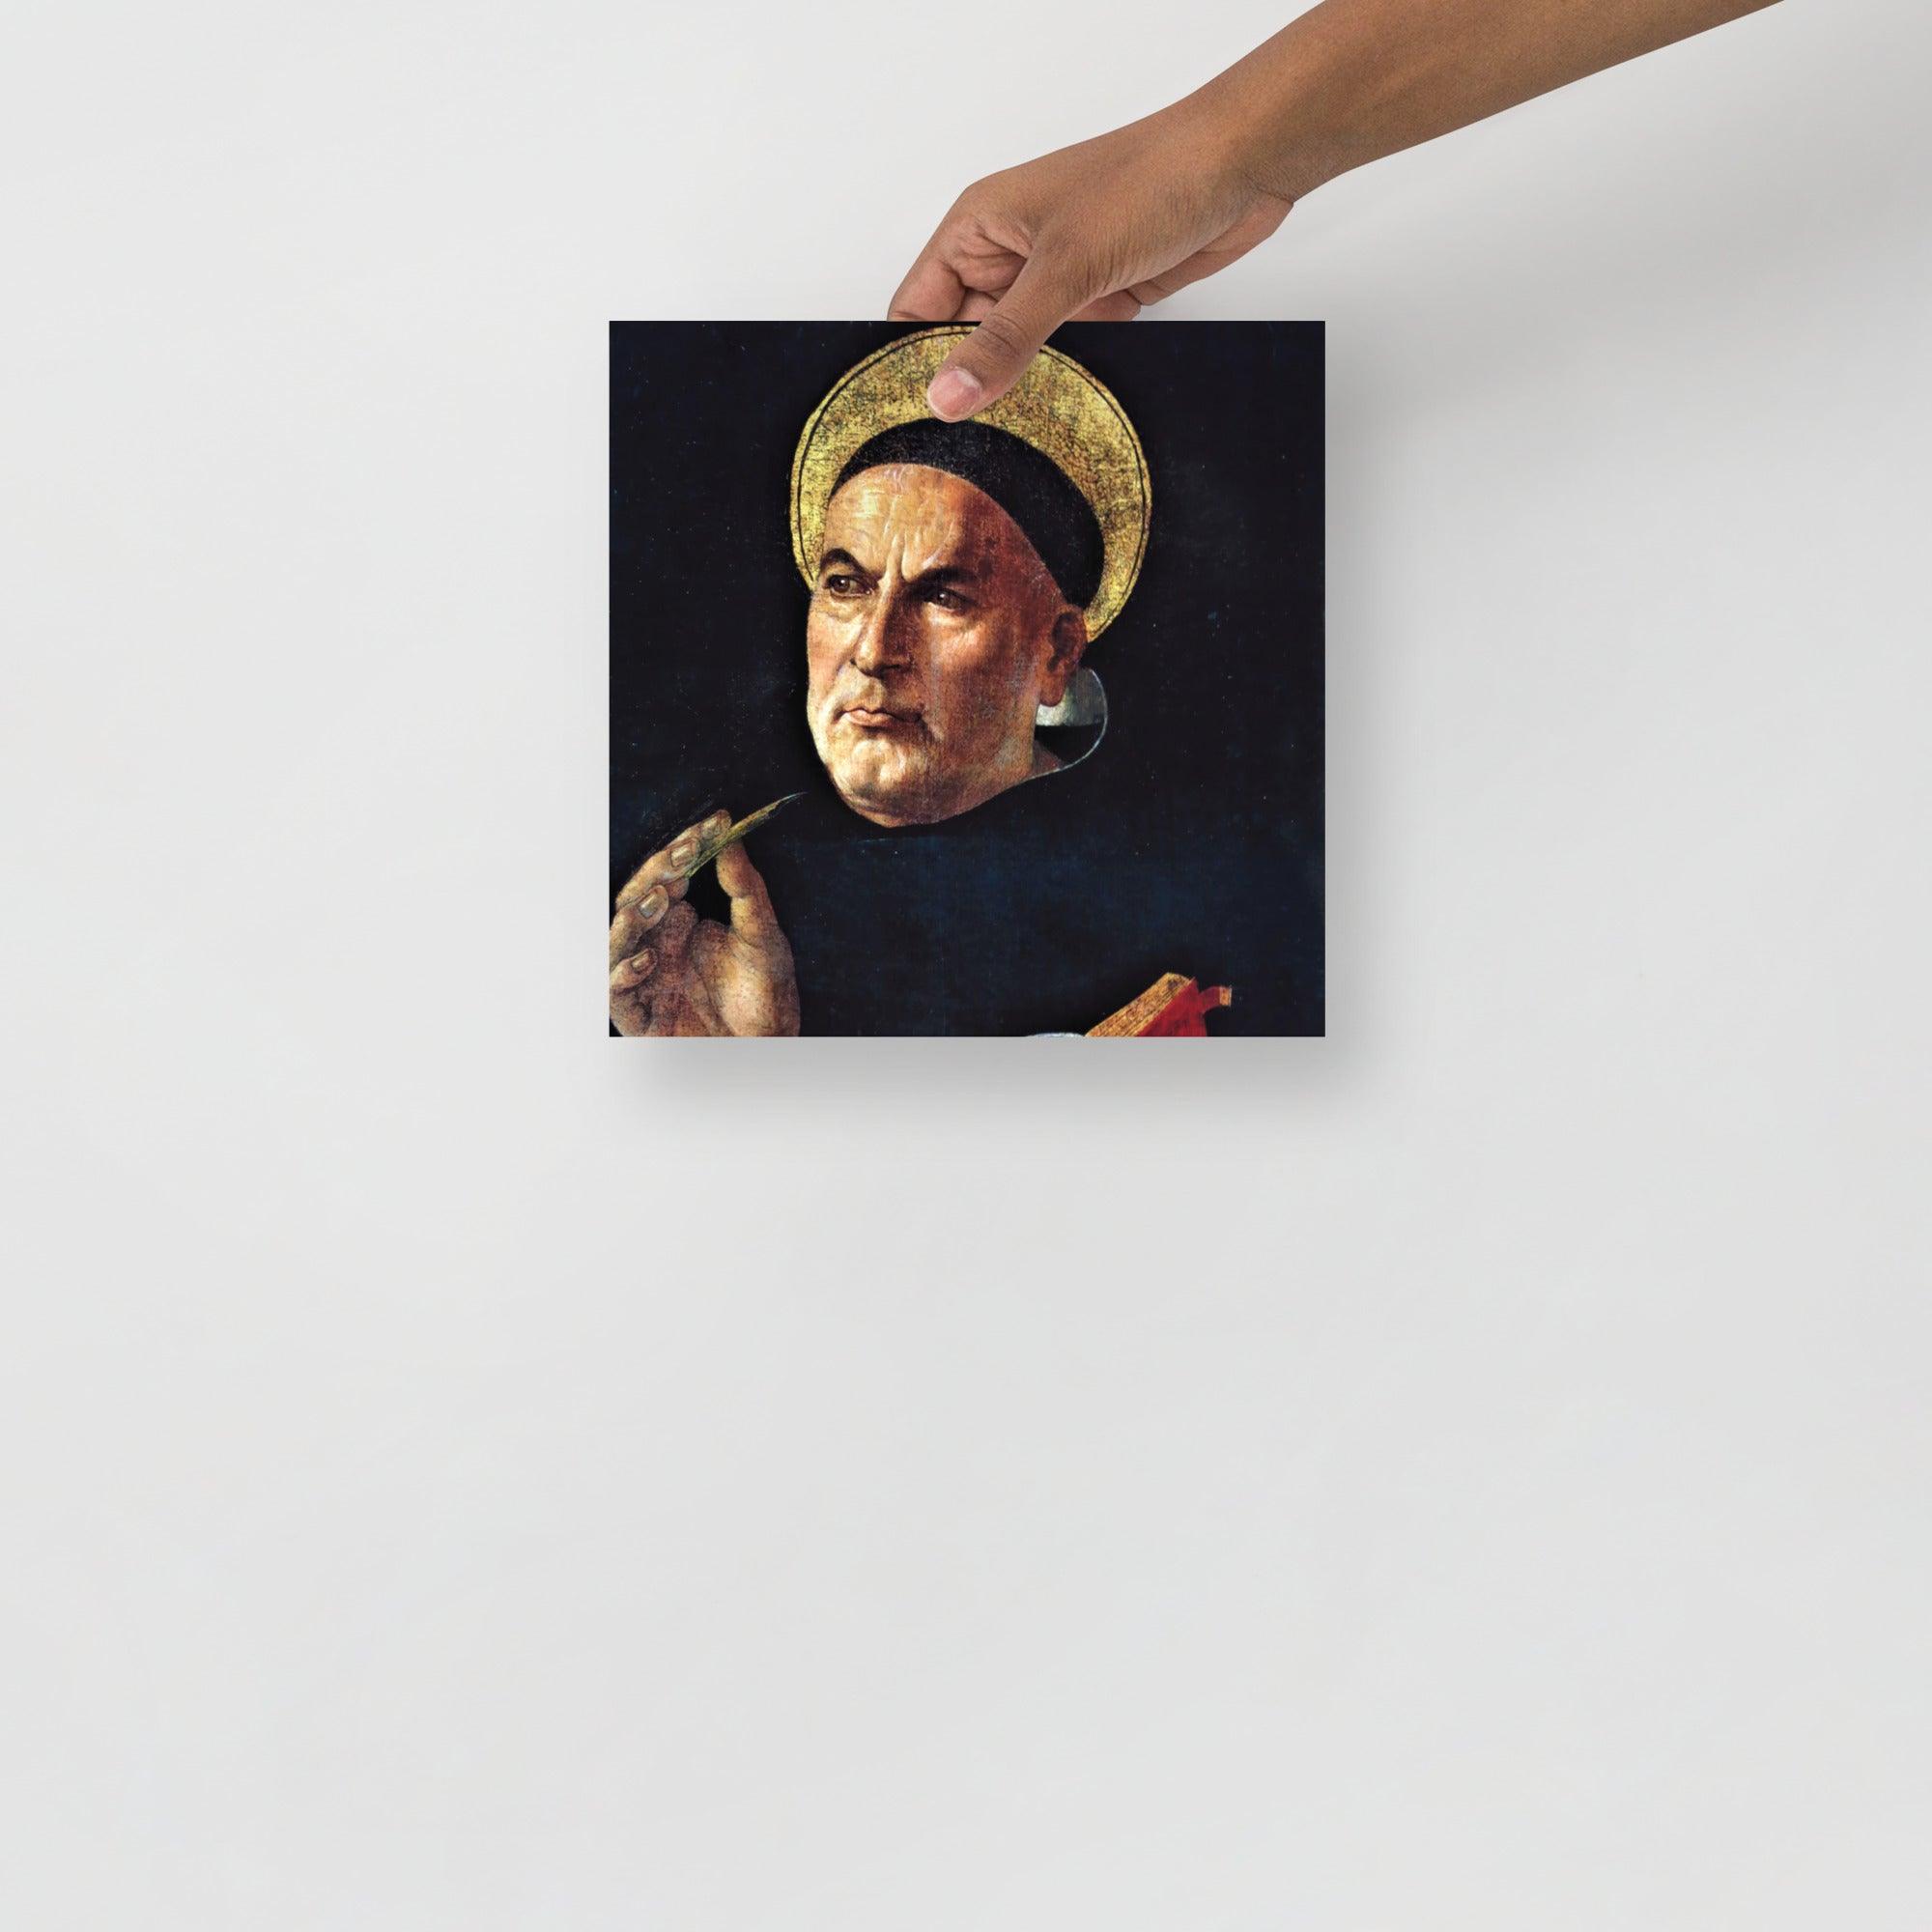 A St. Thomas Aquinas by Sandro Botticelli poster on a plain backdrop in size 10x10”.